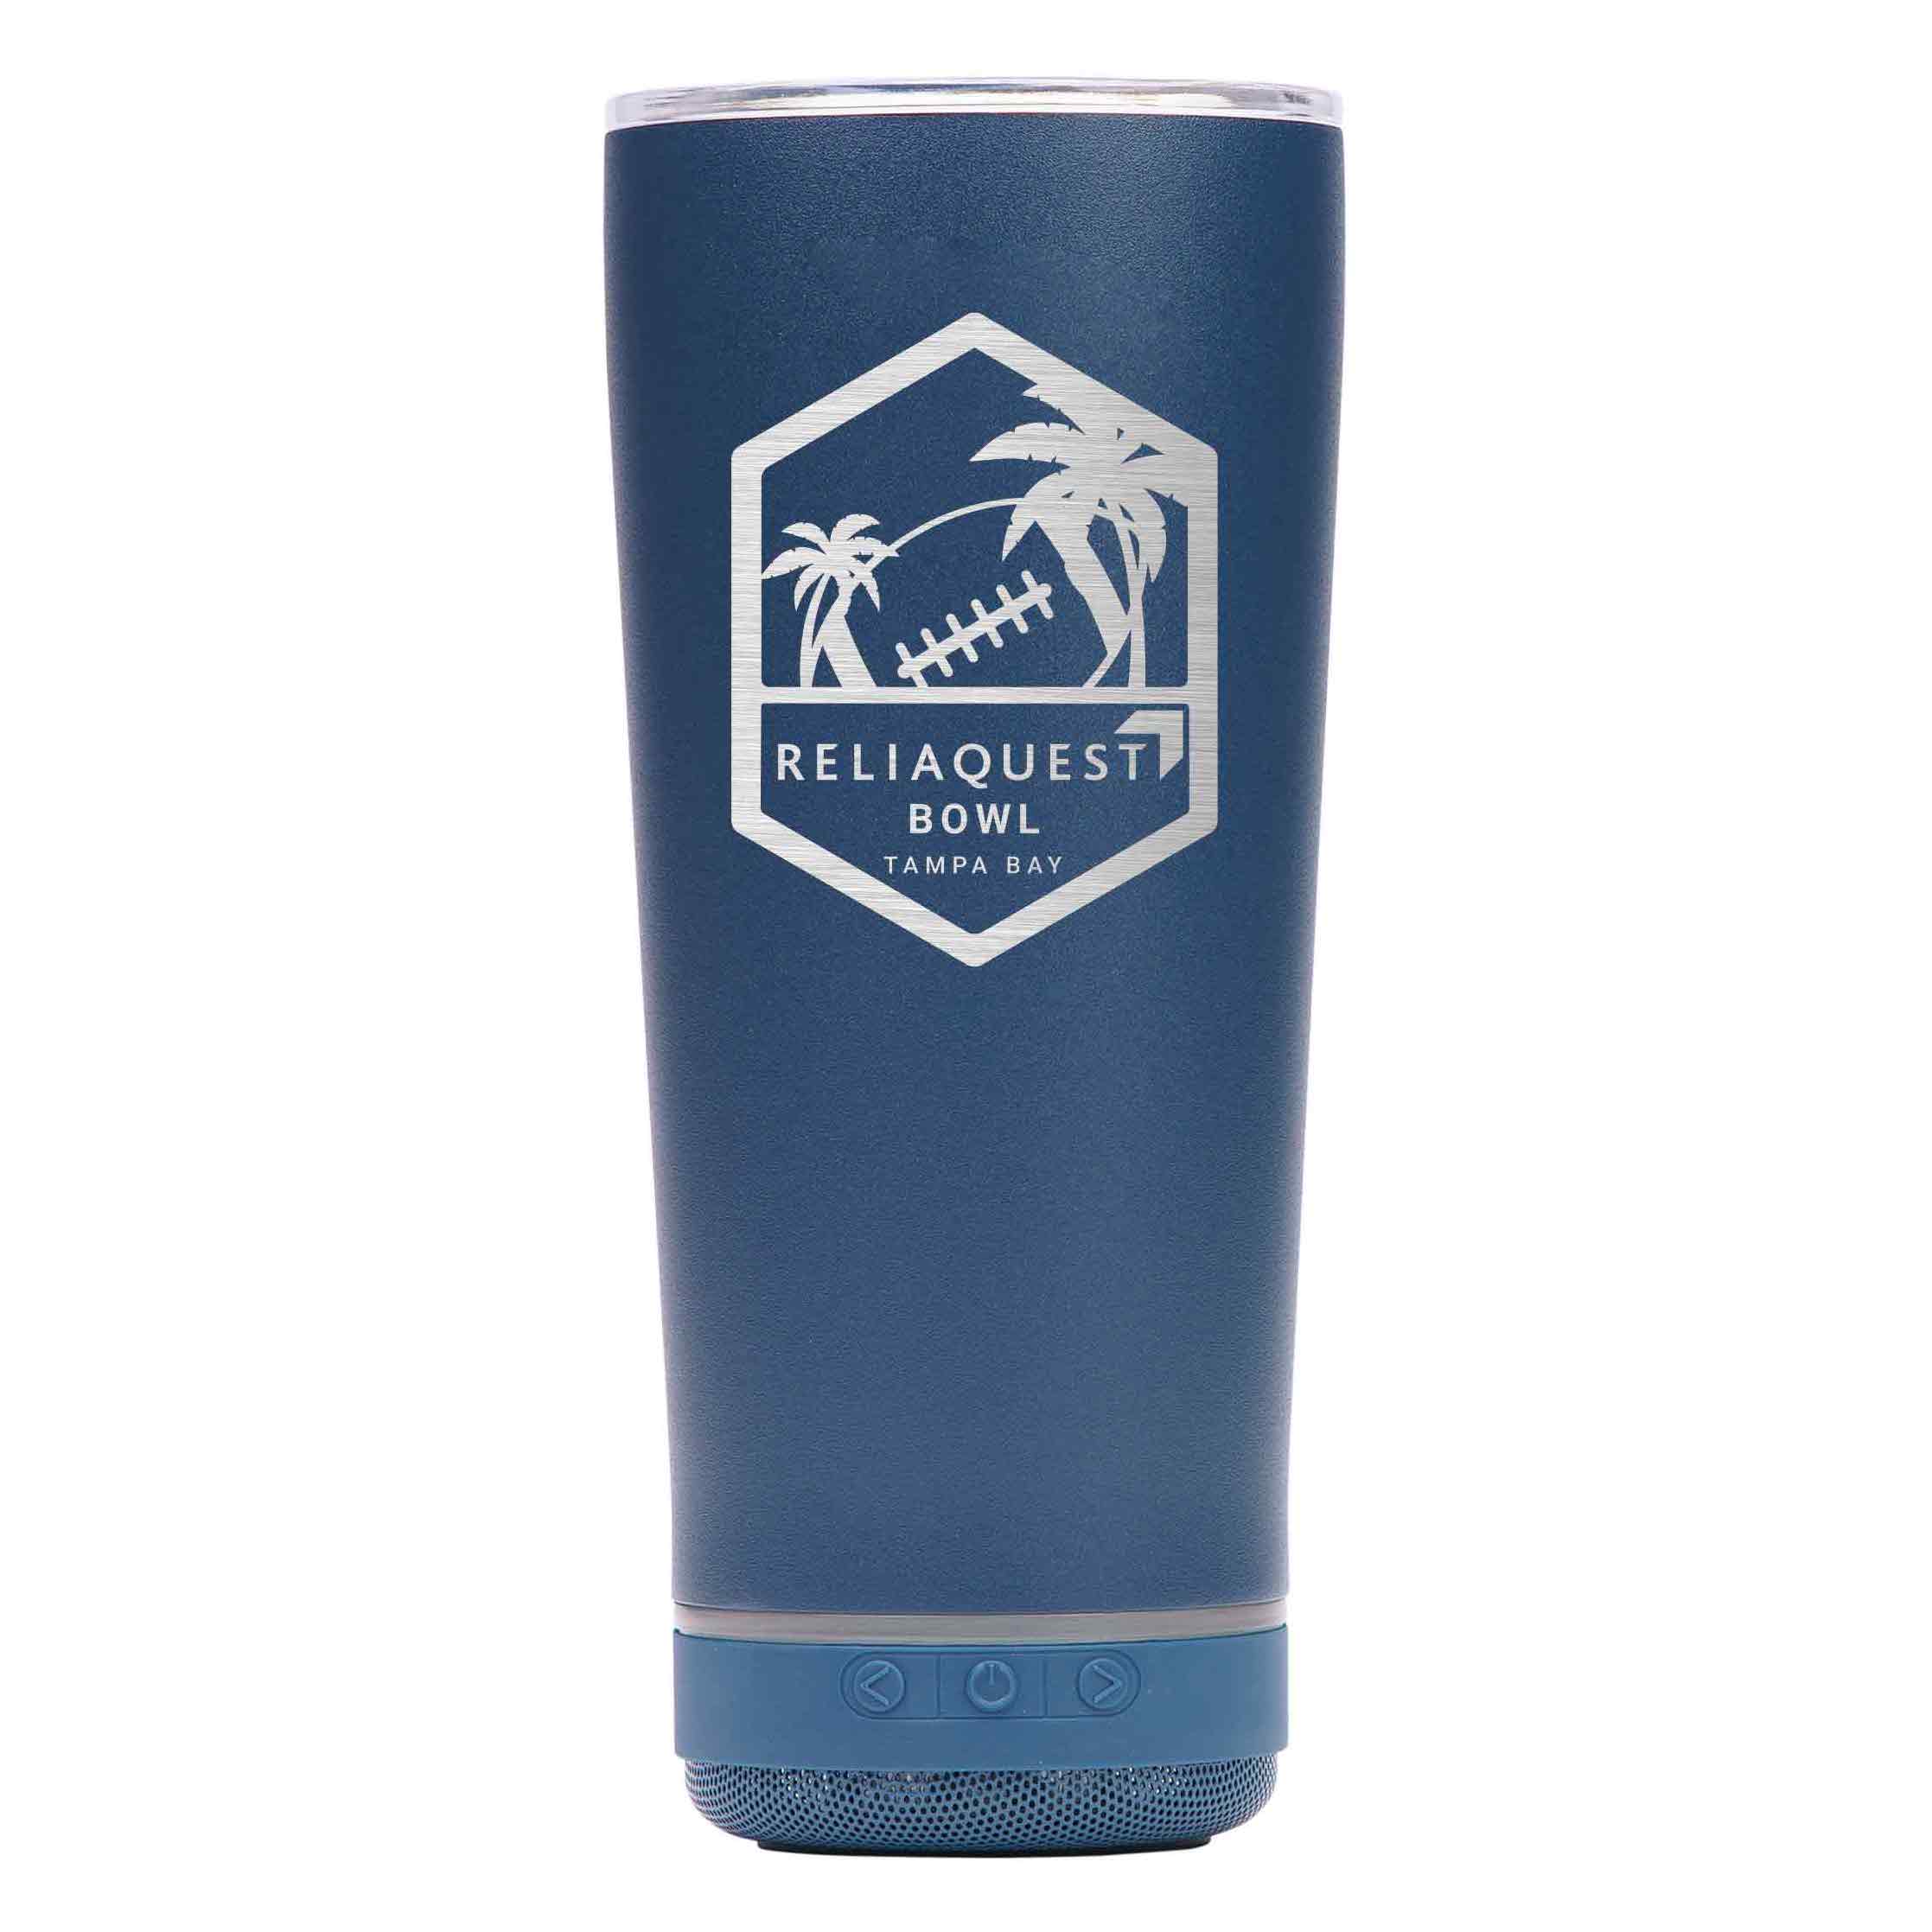 LIMITED EDITION VIBE 18oz TUMBLER and BLUETOOTH SPEAKER!!!****